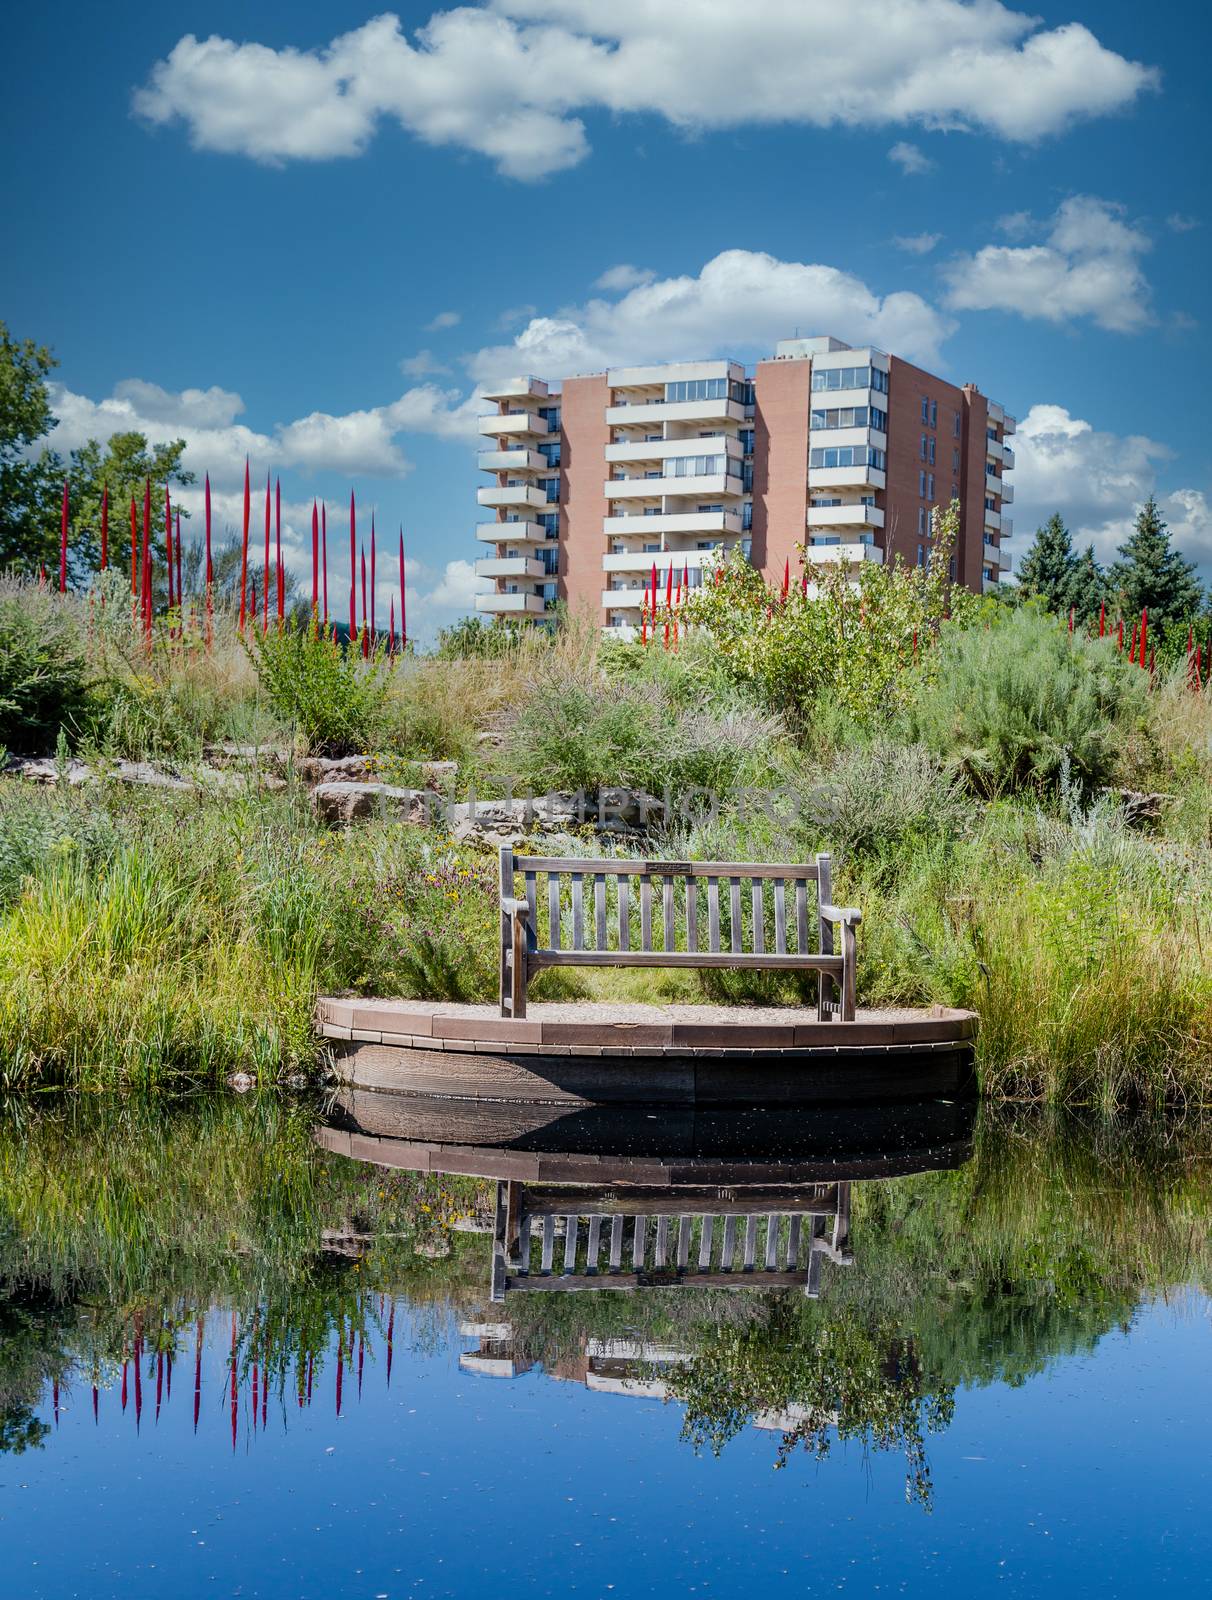 Empty Bench in a Public Park reflected in blue lake with a condo tower in background